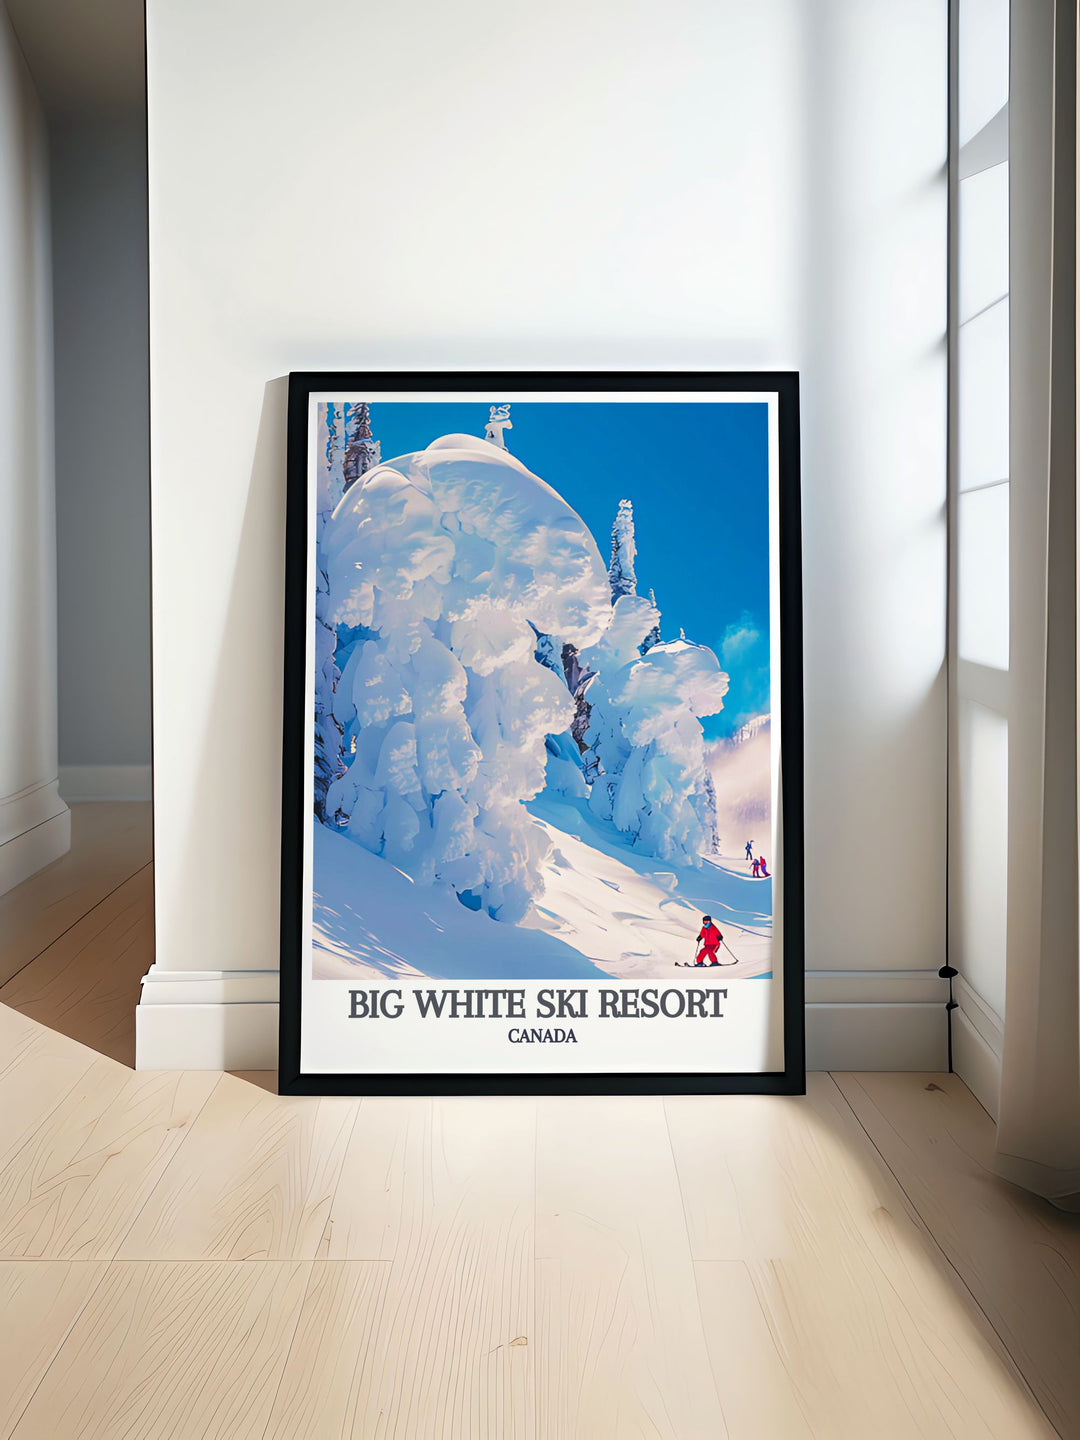 Snow ghosts at Big White Ski Resort captured in a stunning gallery wall art print, showcasing the frosty trees and majestic Rocky Mountains, perfect for adding a touch of Canadian winter magic to your home decor.